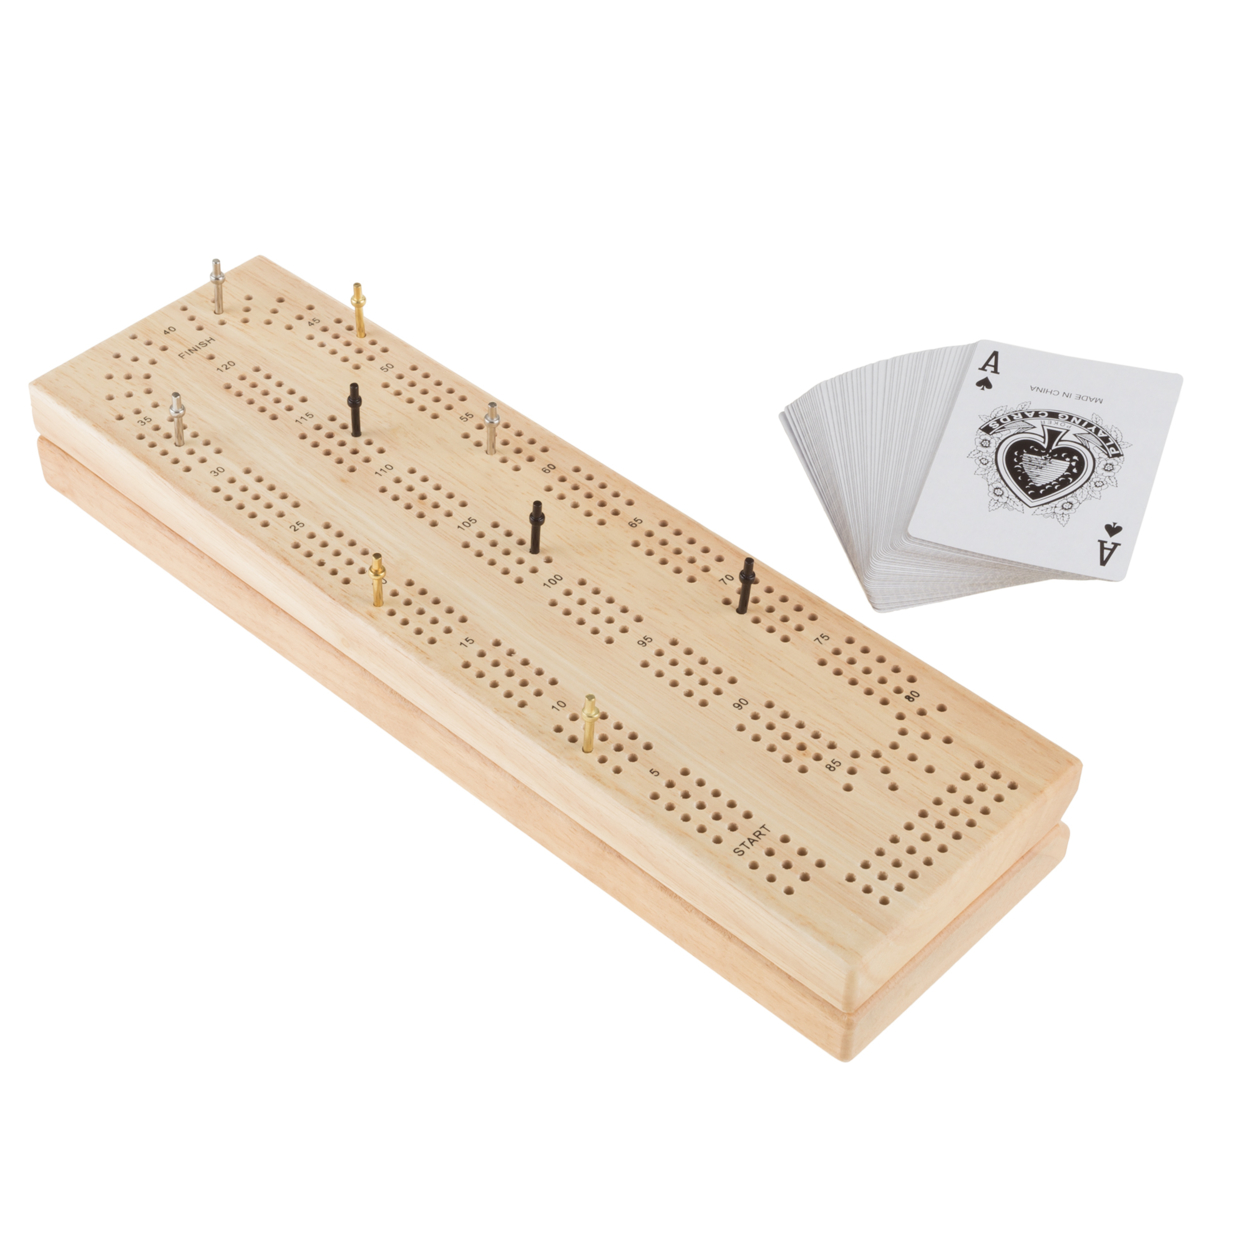 Wooden Cribbage Board Game Complete Set Family Card Game Kids Adults 12 X 3.5